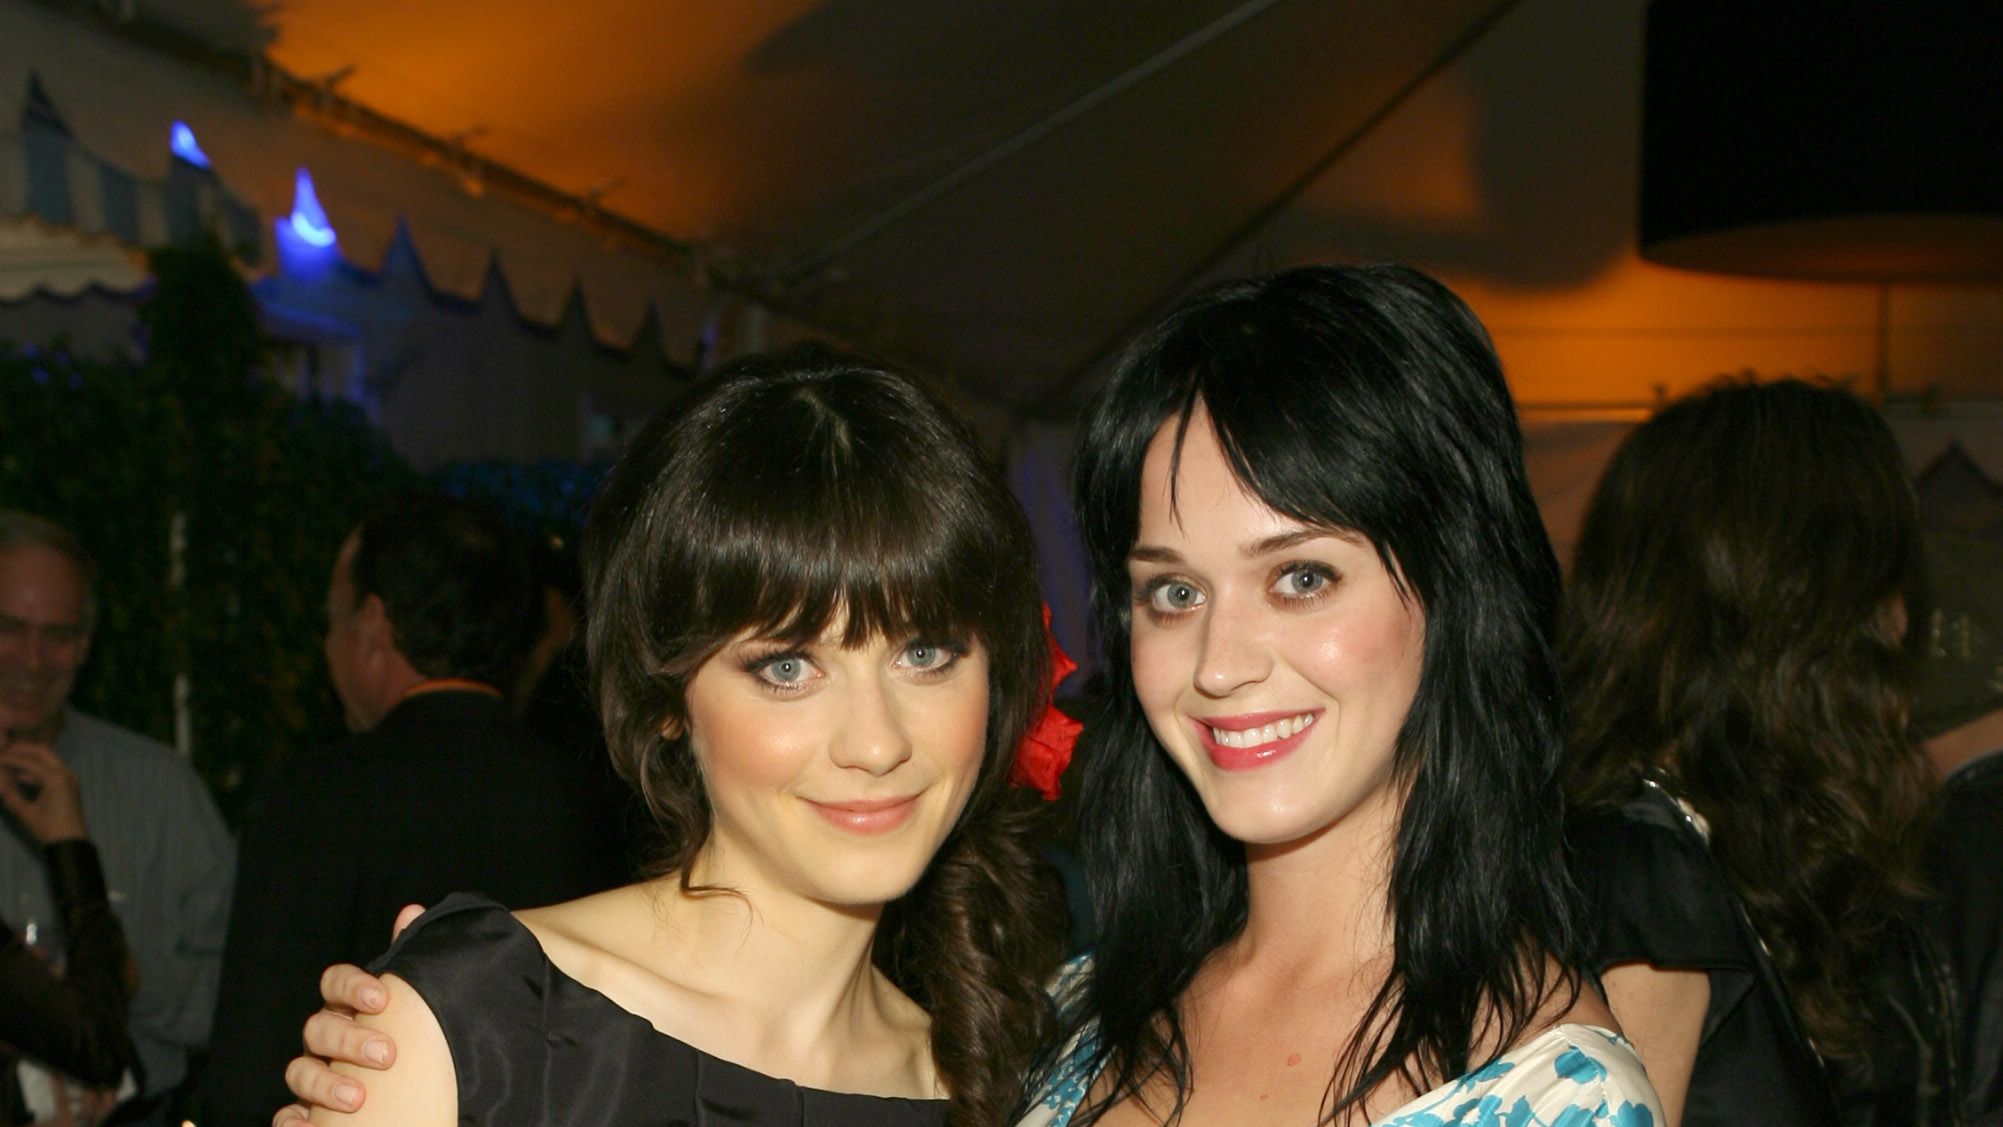 Zooey Deschanel Sex Tape - Katy Perry Pretended to be Zooey Deschanel to Get Into Clubs